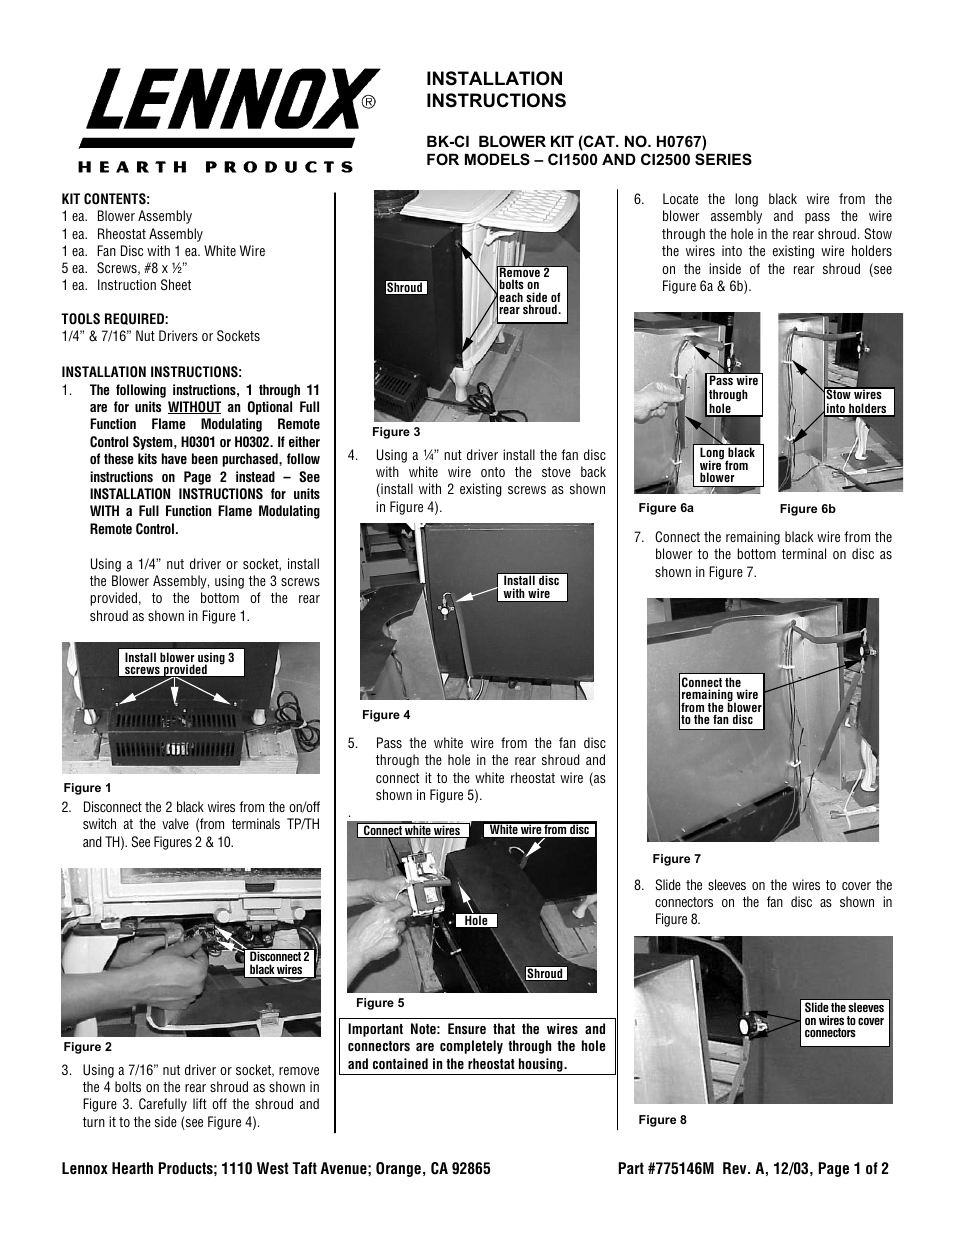 Lennox Hearth CI1500 User Manual | 2 pages